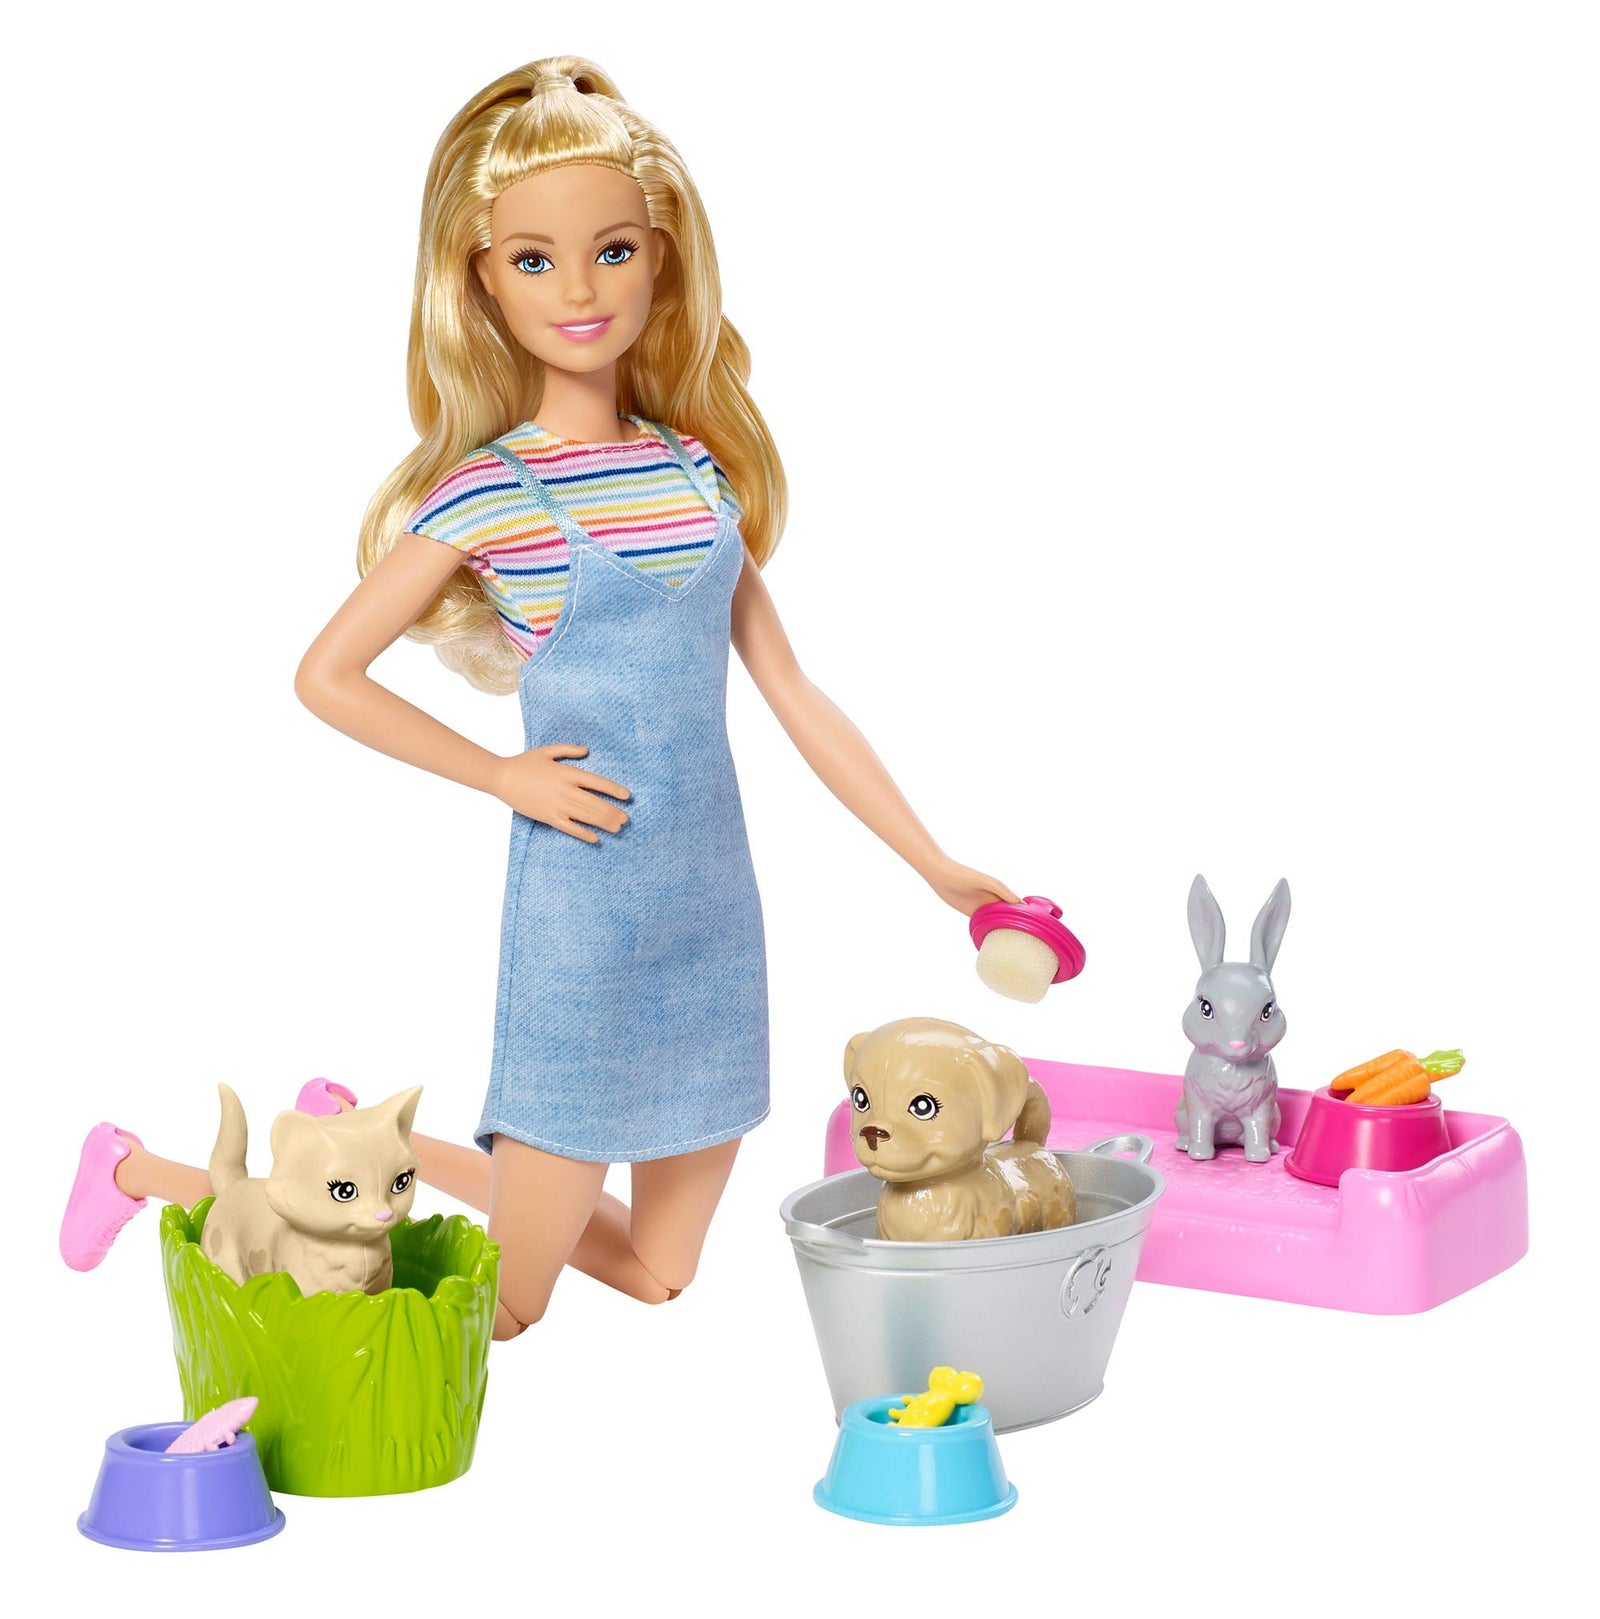 Barbie Play ‘n’ Wash Pets Playset with Blonde Doll, 3 Color-Change Animals a Puppy, Kitten and Bunny and 10 Pet and Grooming Accessories, Gift for 3 to 7 Year Olds